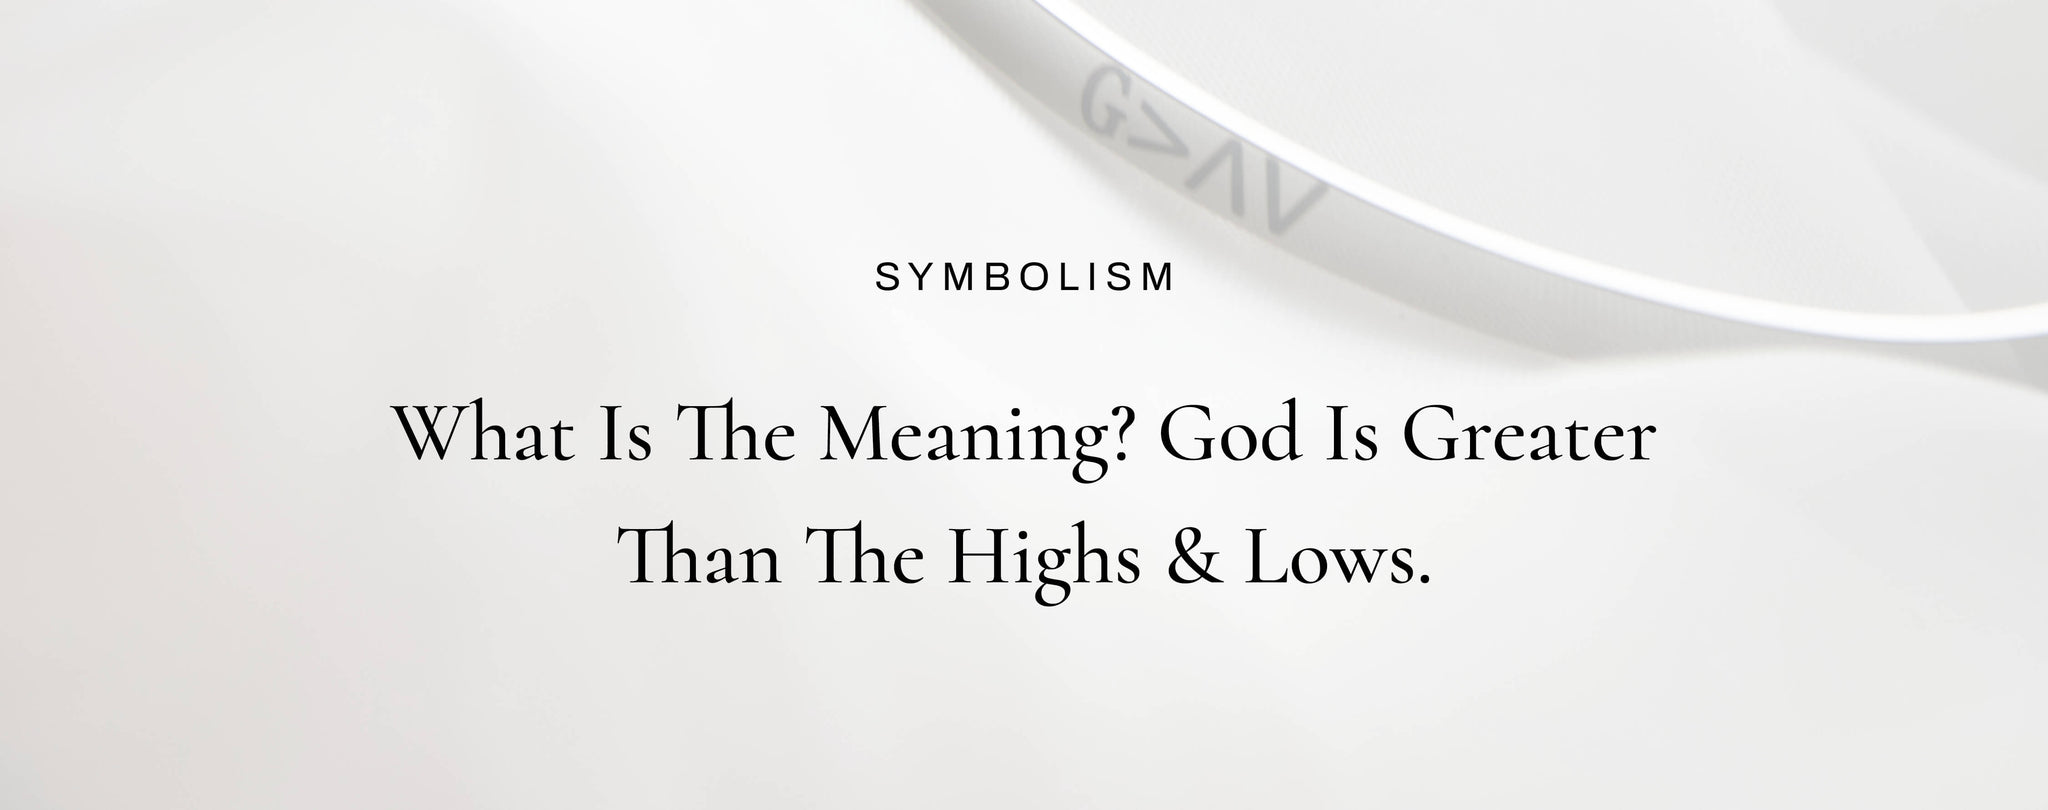 god is greater than the highs and lows meaning